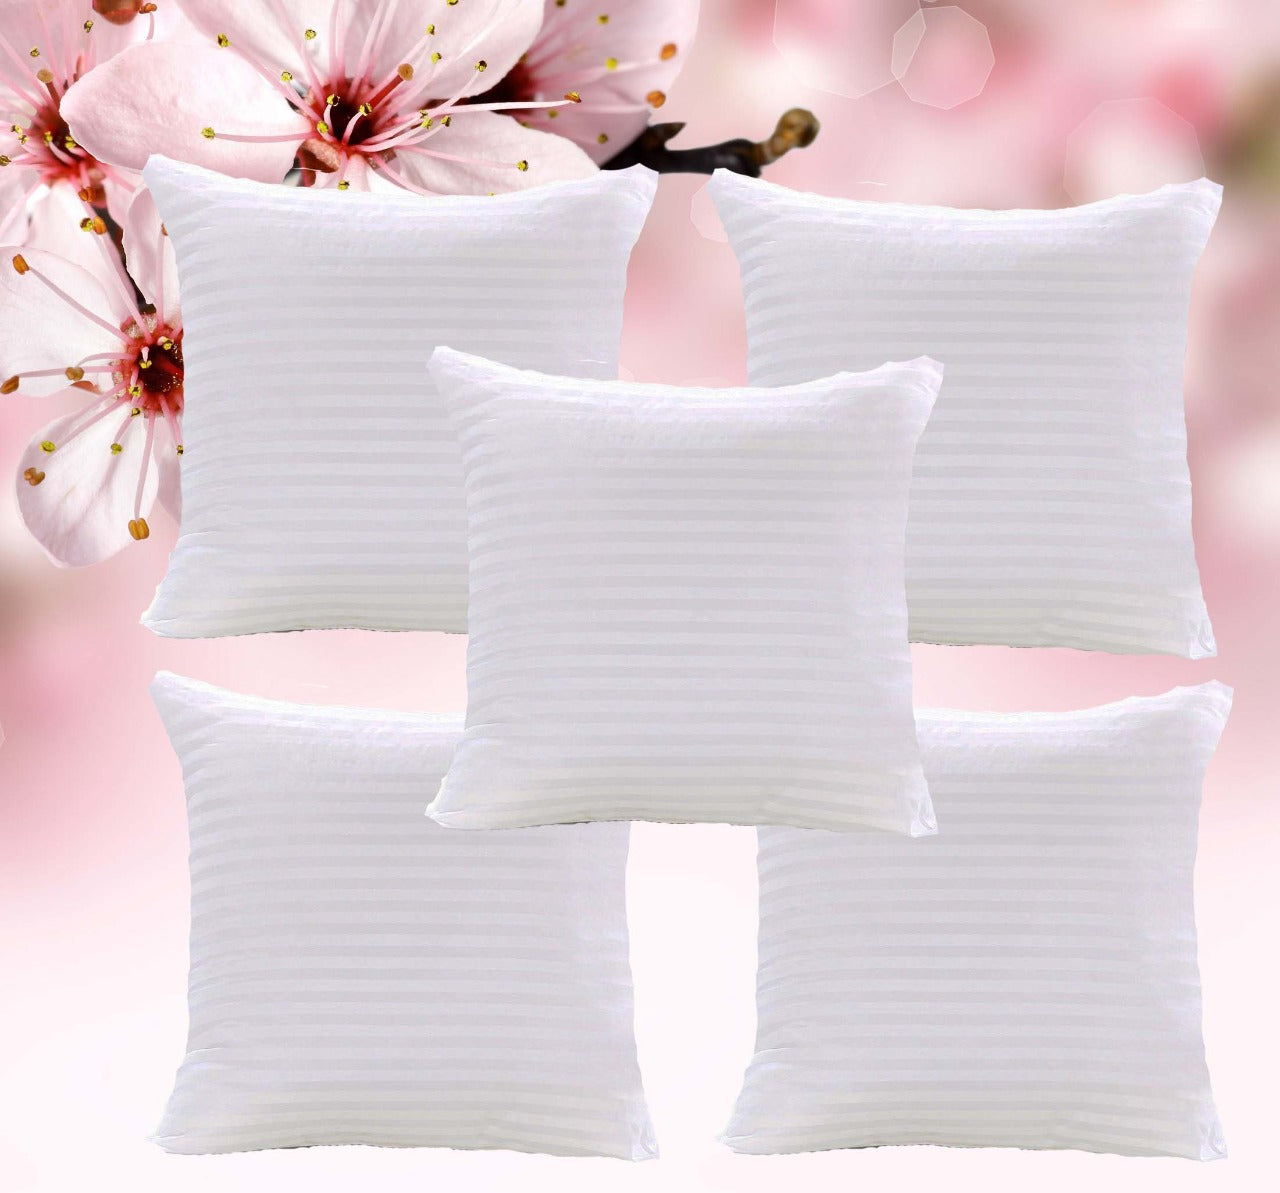 High Quality and Best Fiber Soft Cushion (White) Set of 5 (12x12 Inches)